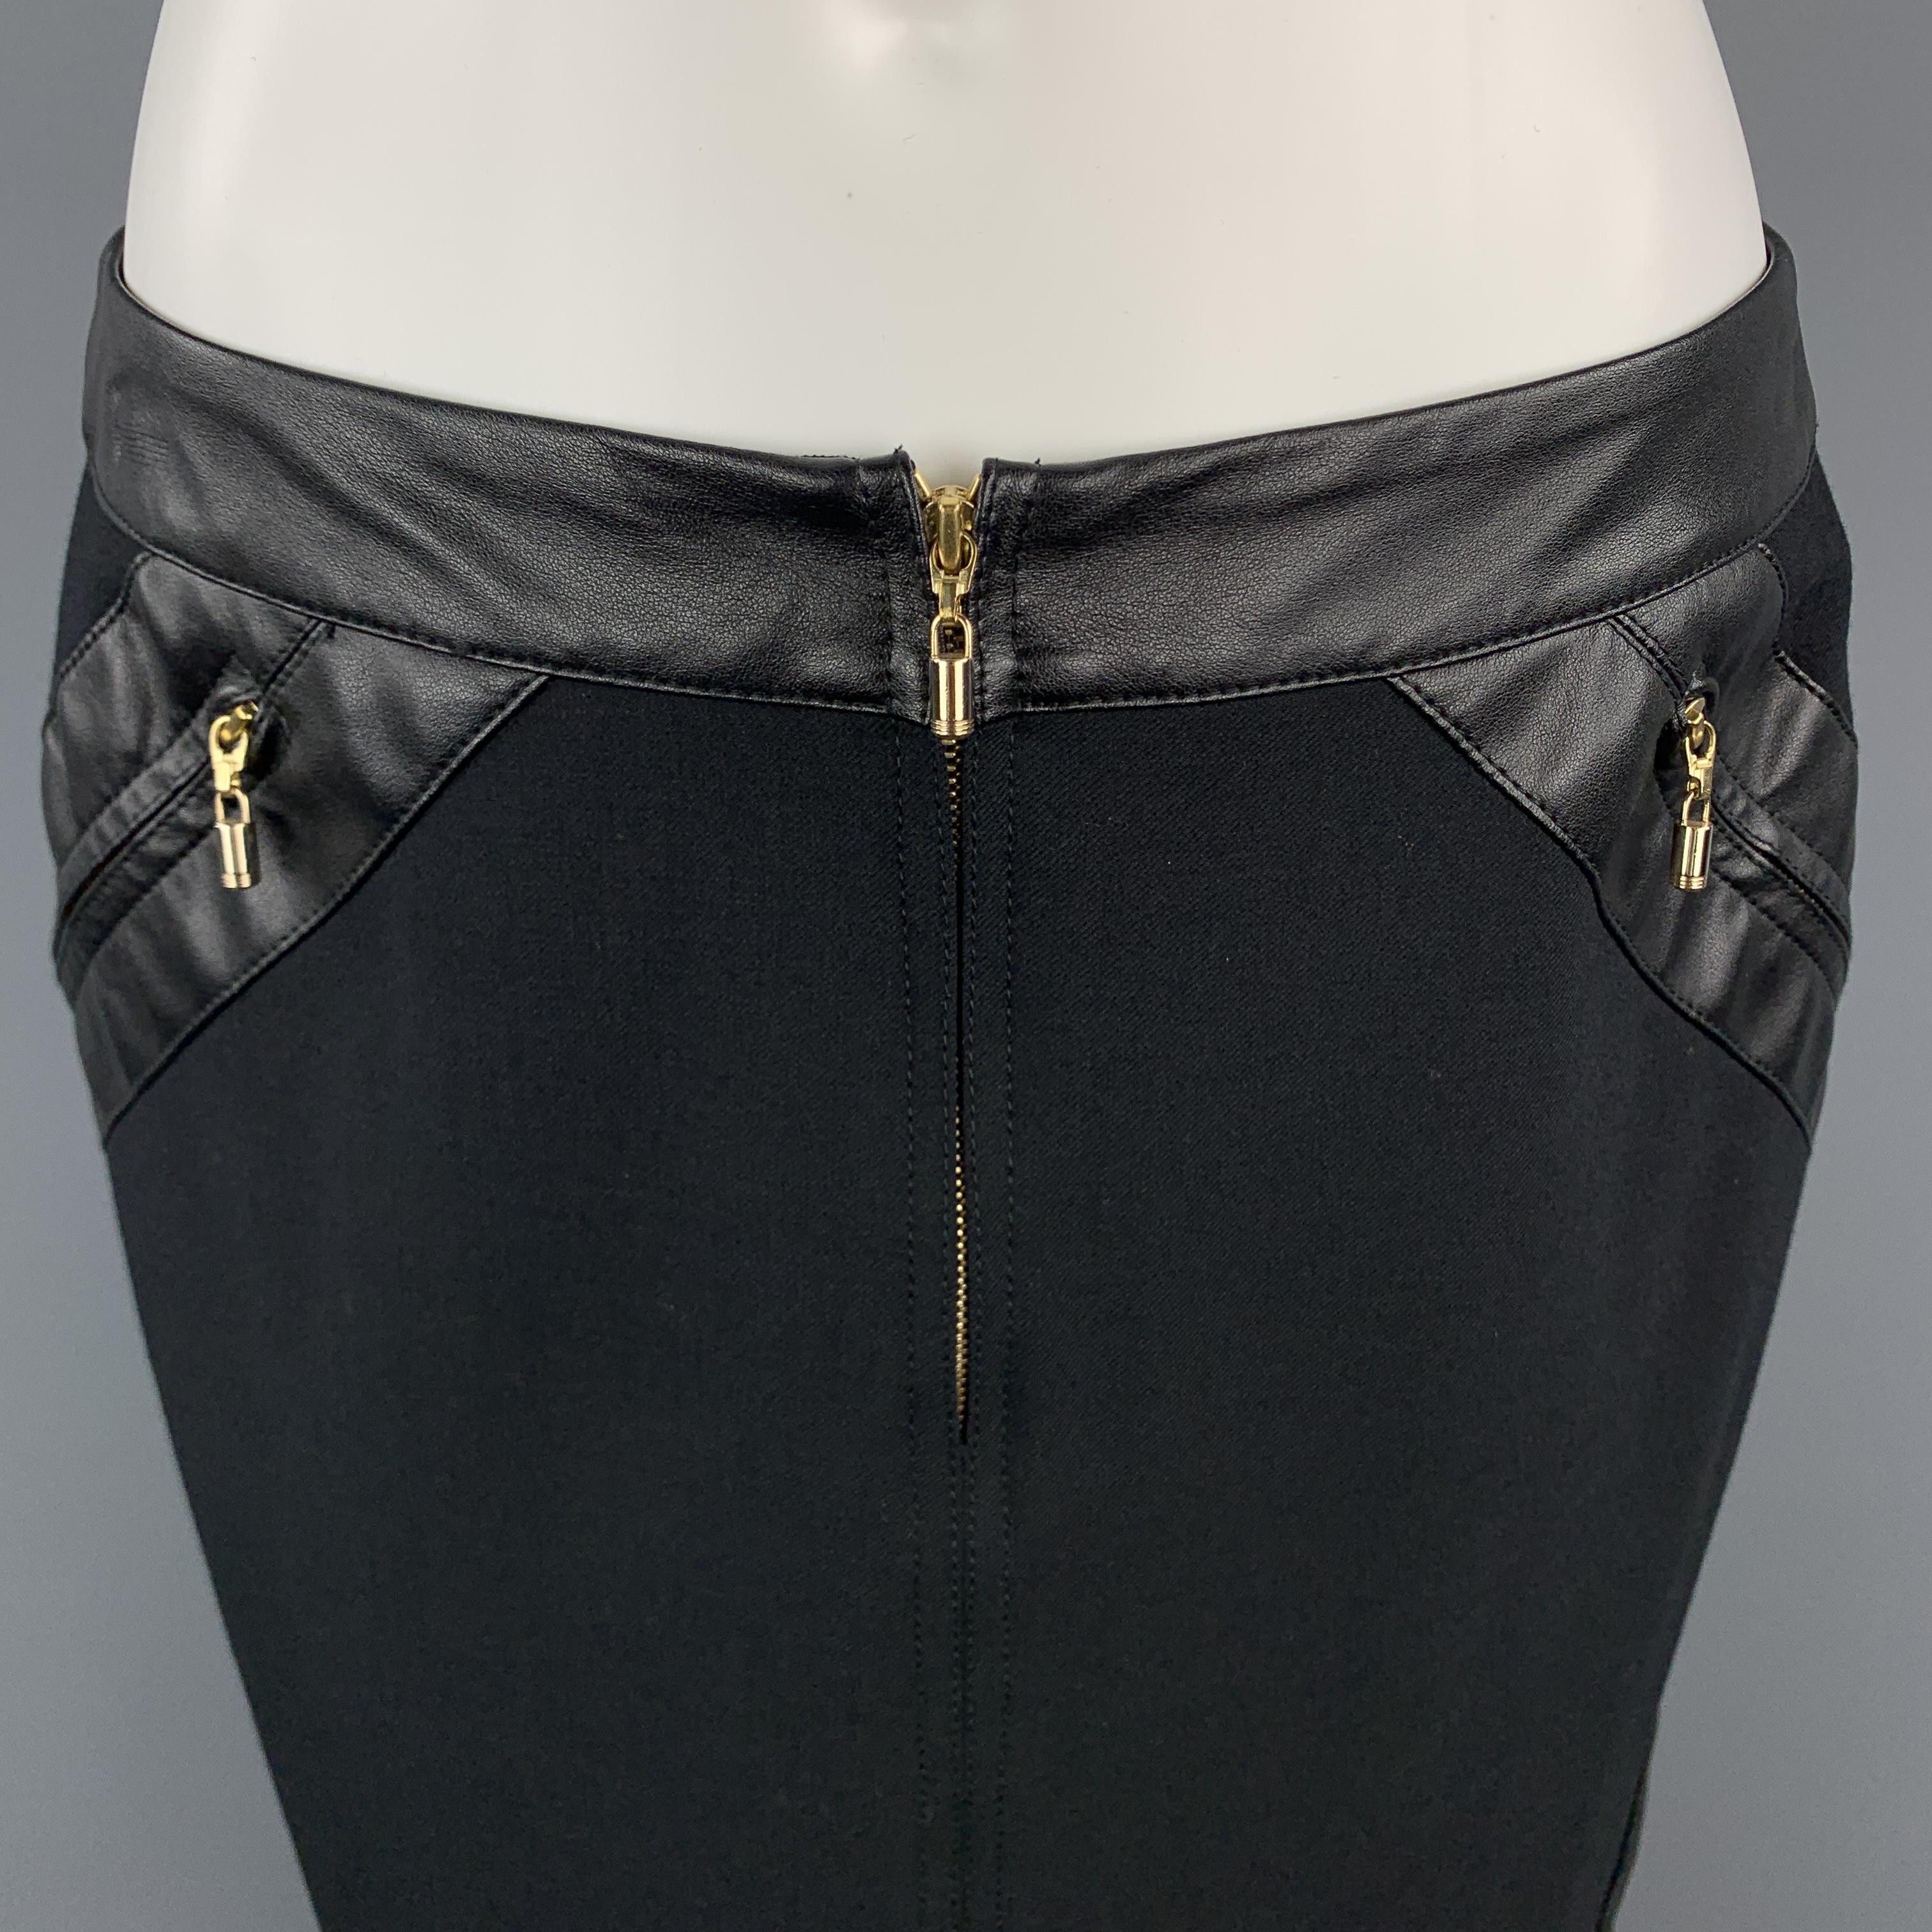 GIANNI VERSACE Pencil Skirt comes in a black solid twill wool blend material, in a knee length, featuring leather trim, gold tone metal zipper, and slit pockets. Made in Italy. 

Excellent Pre-Owned Condition.
Marked: IT 42

Measurements:

Waist: 29